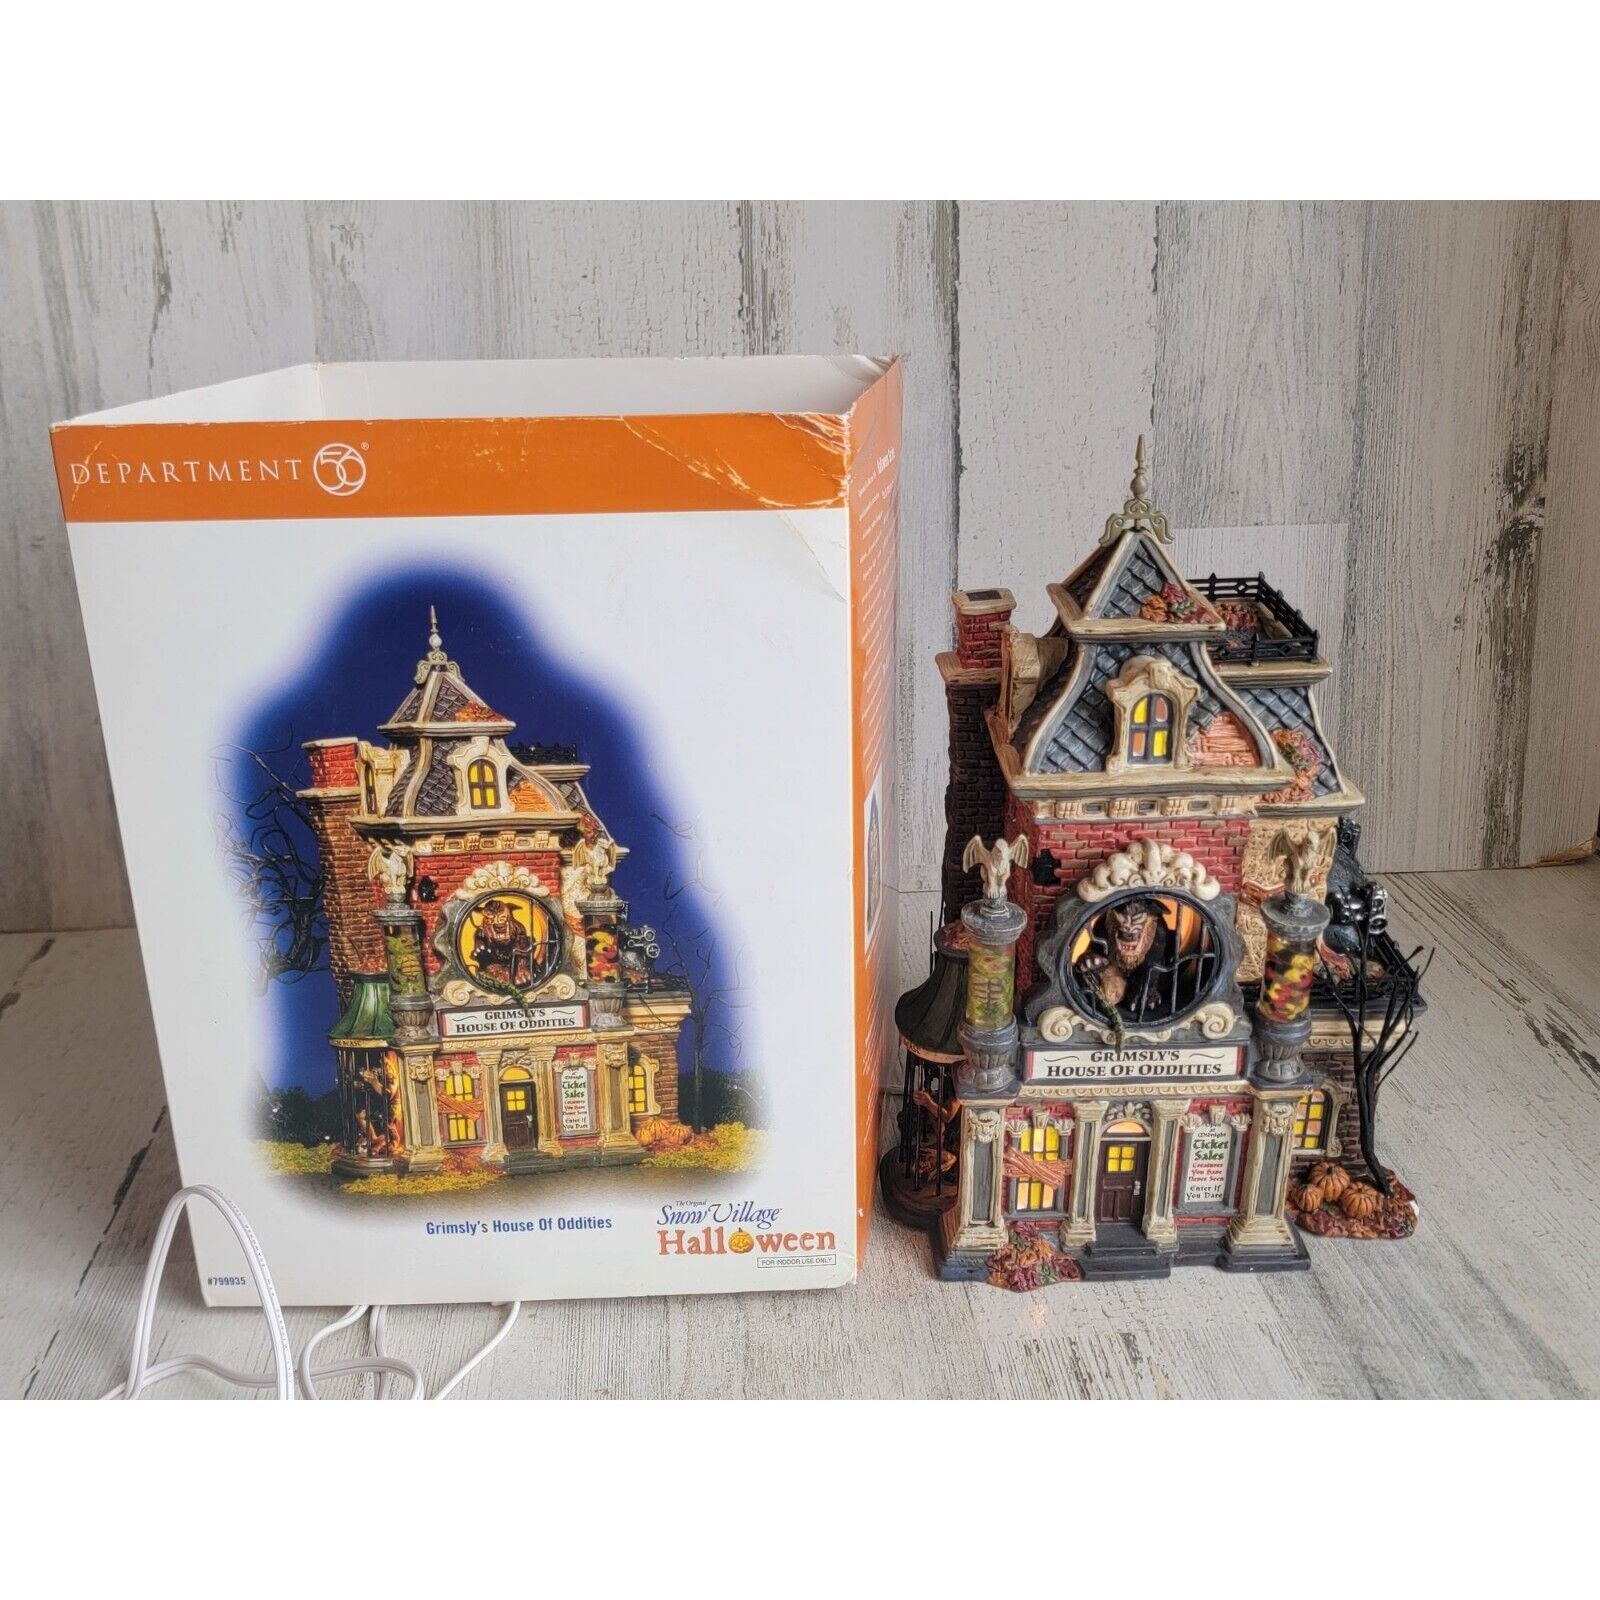 Dept 56 799935 Grimsly\'s House of Oddities snow village accessory Halloween